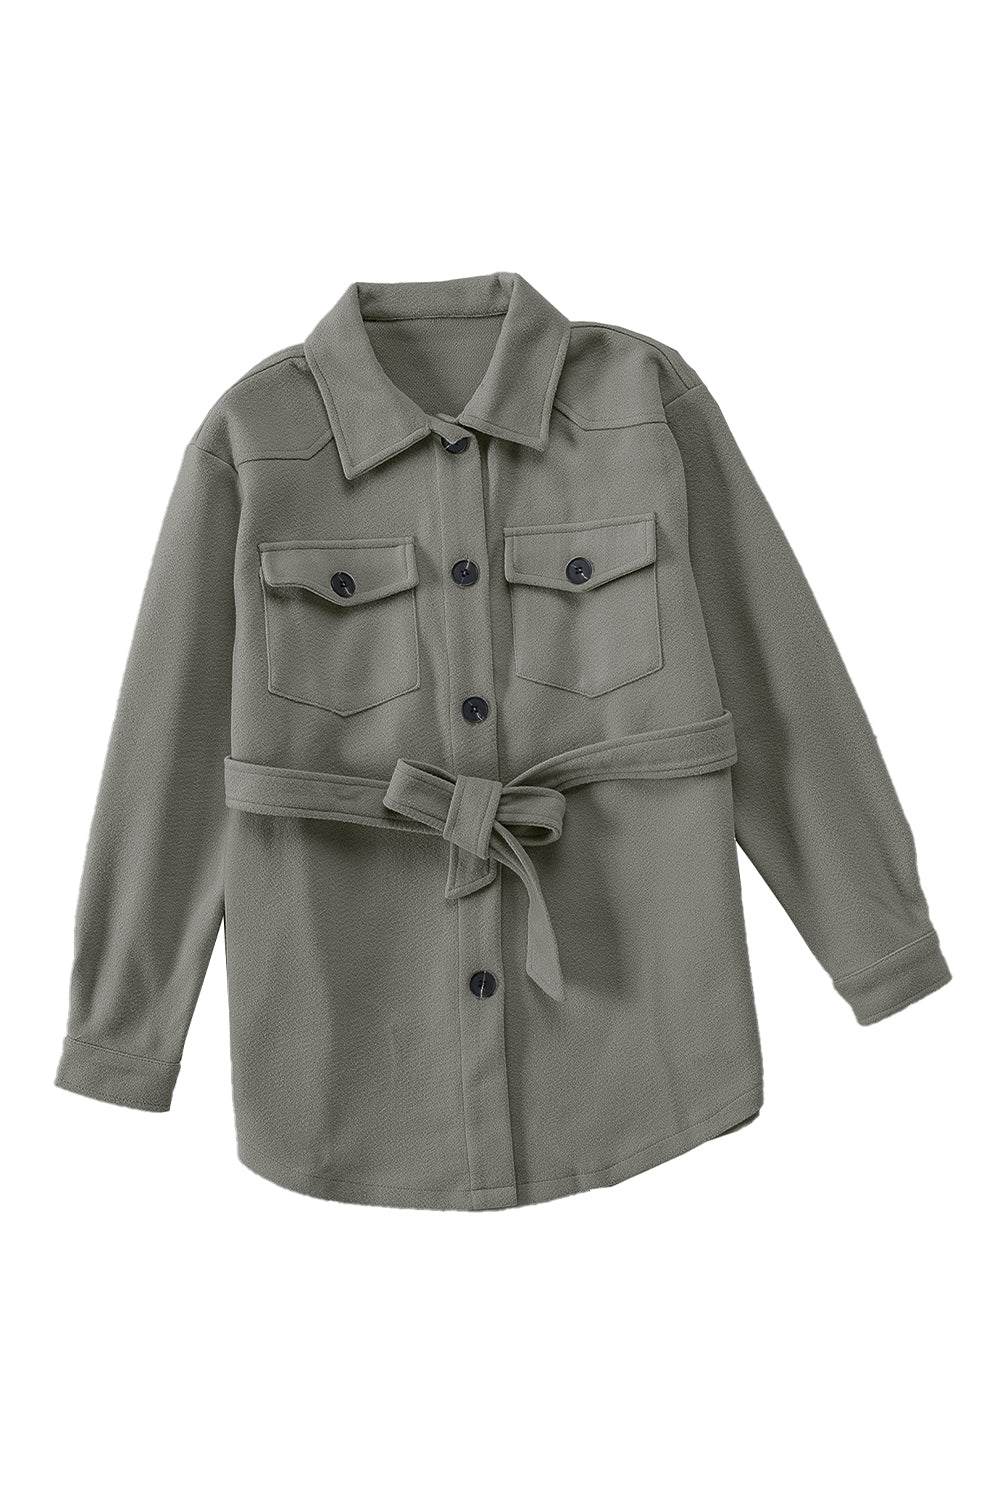 Gray Women's Lapel Button Down Coat Winter Belted Coat with Pockets LC8511359-11